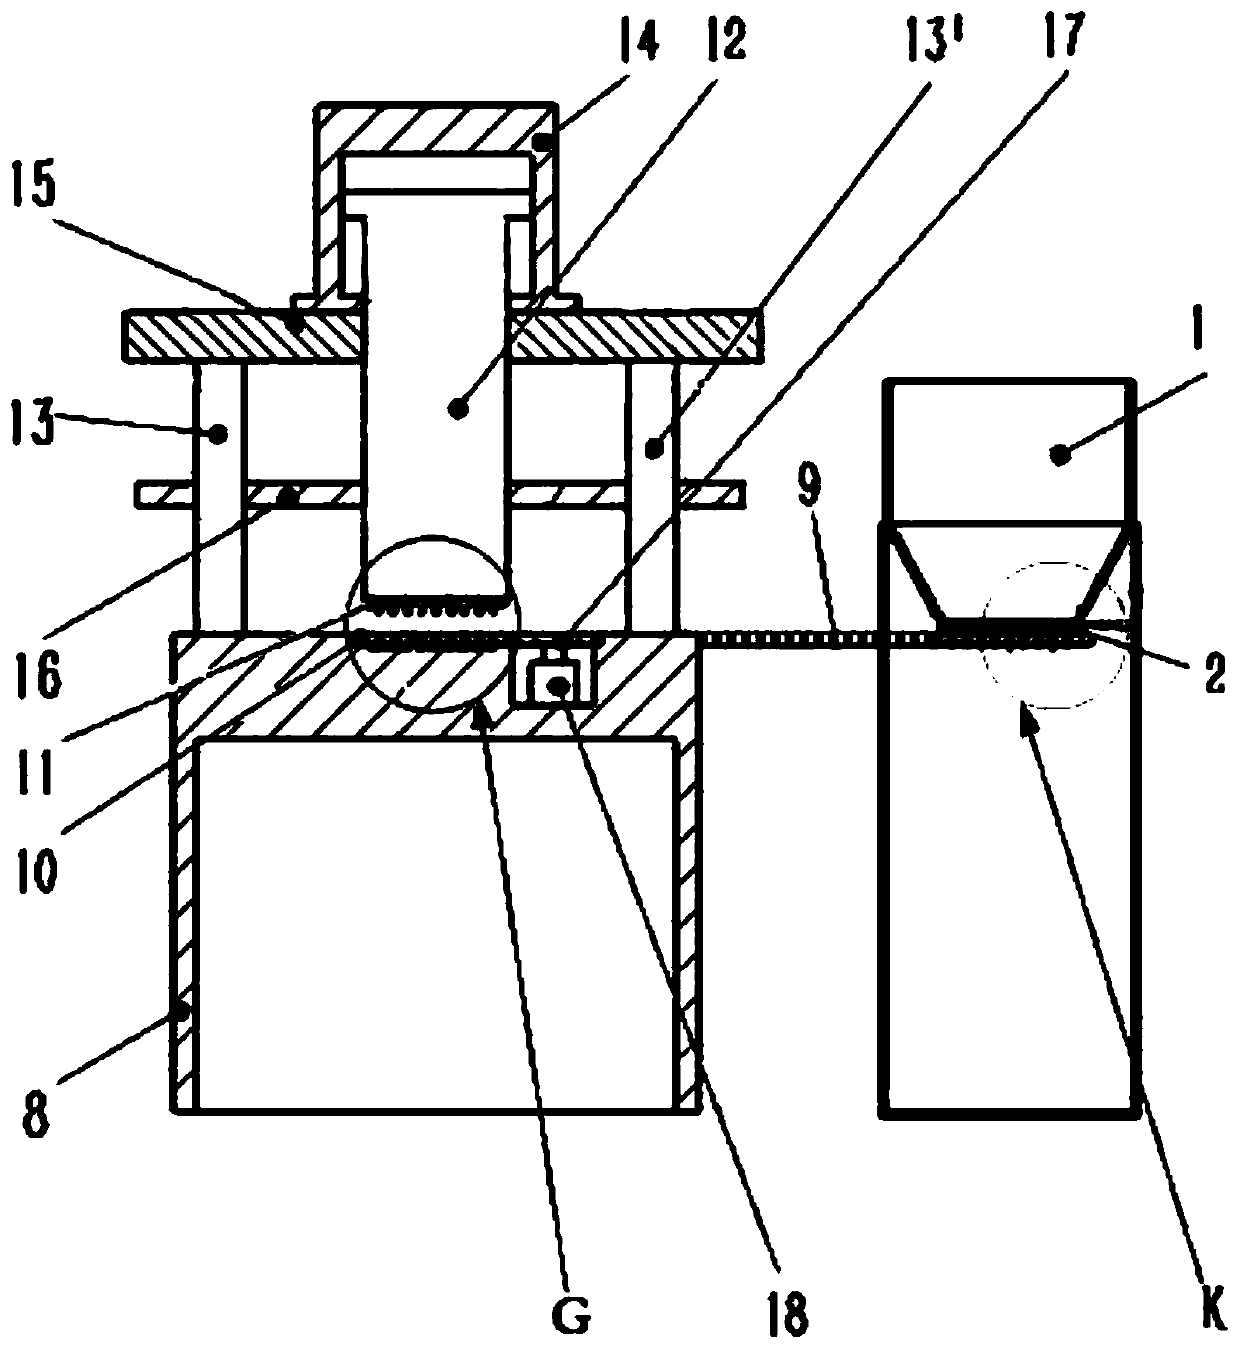 A powder compacting device